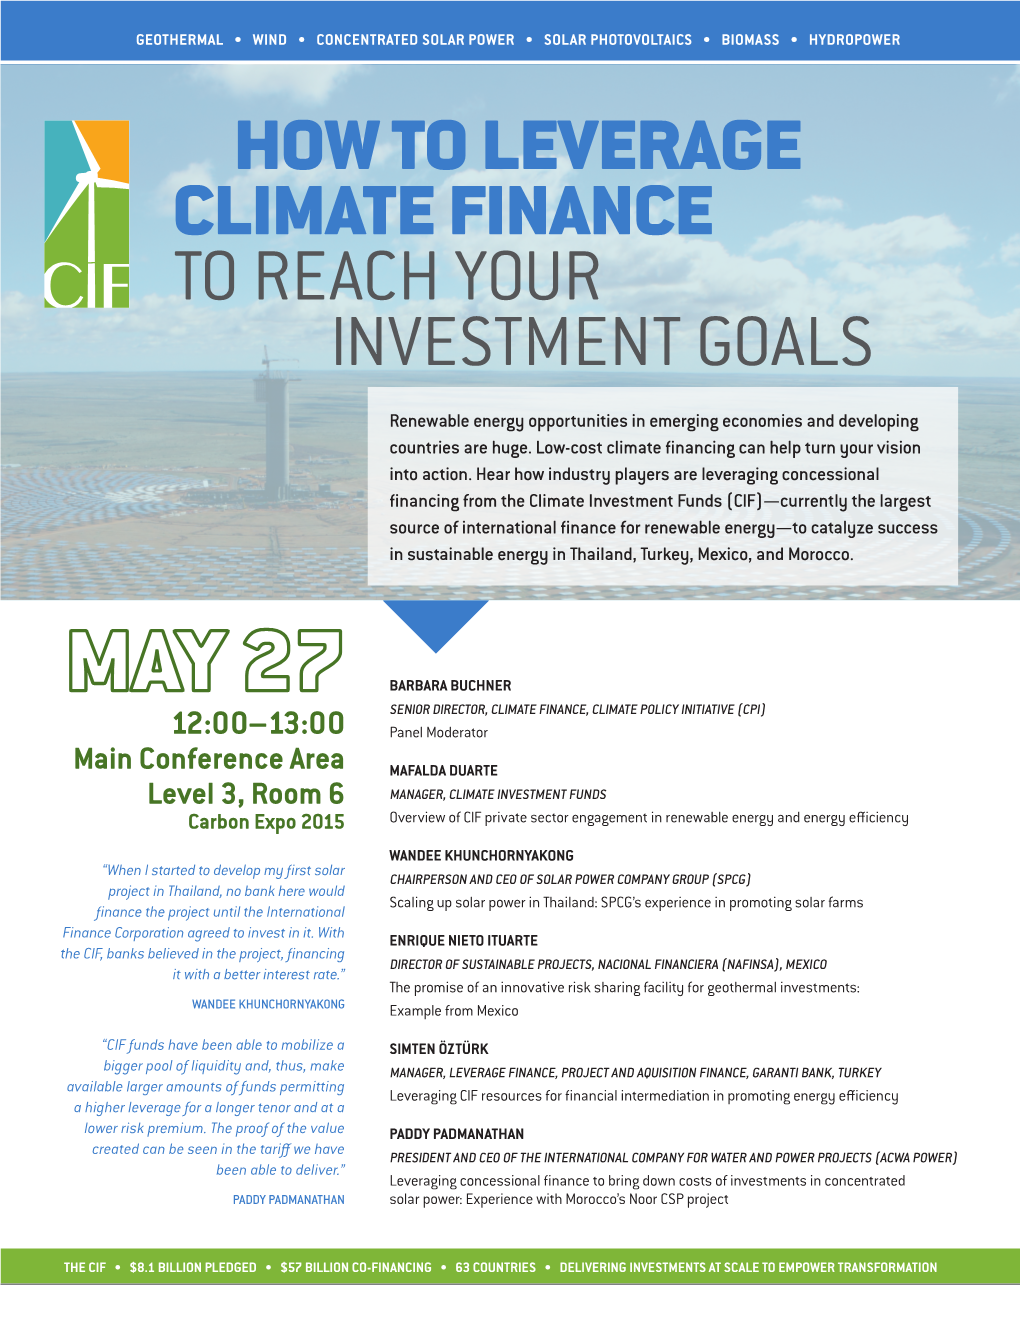 How to Leverage Climate Finance to Reach Your Investment Goals